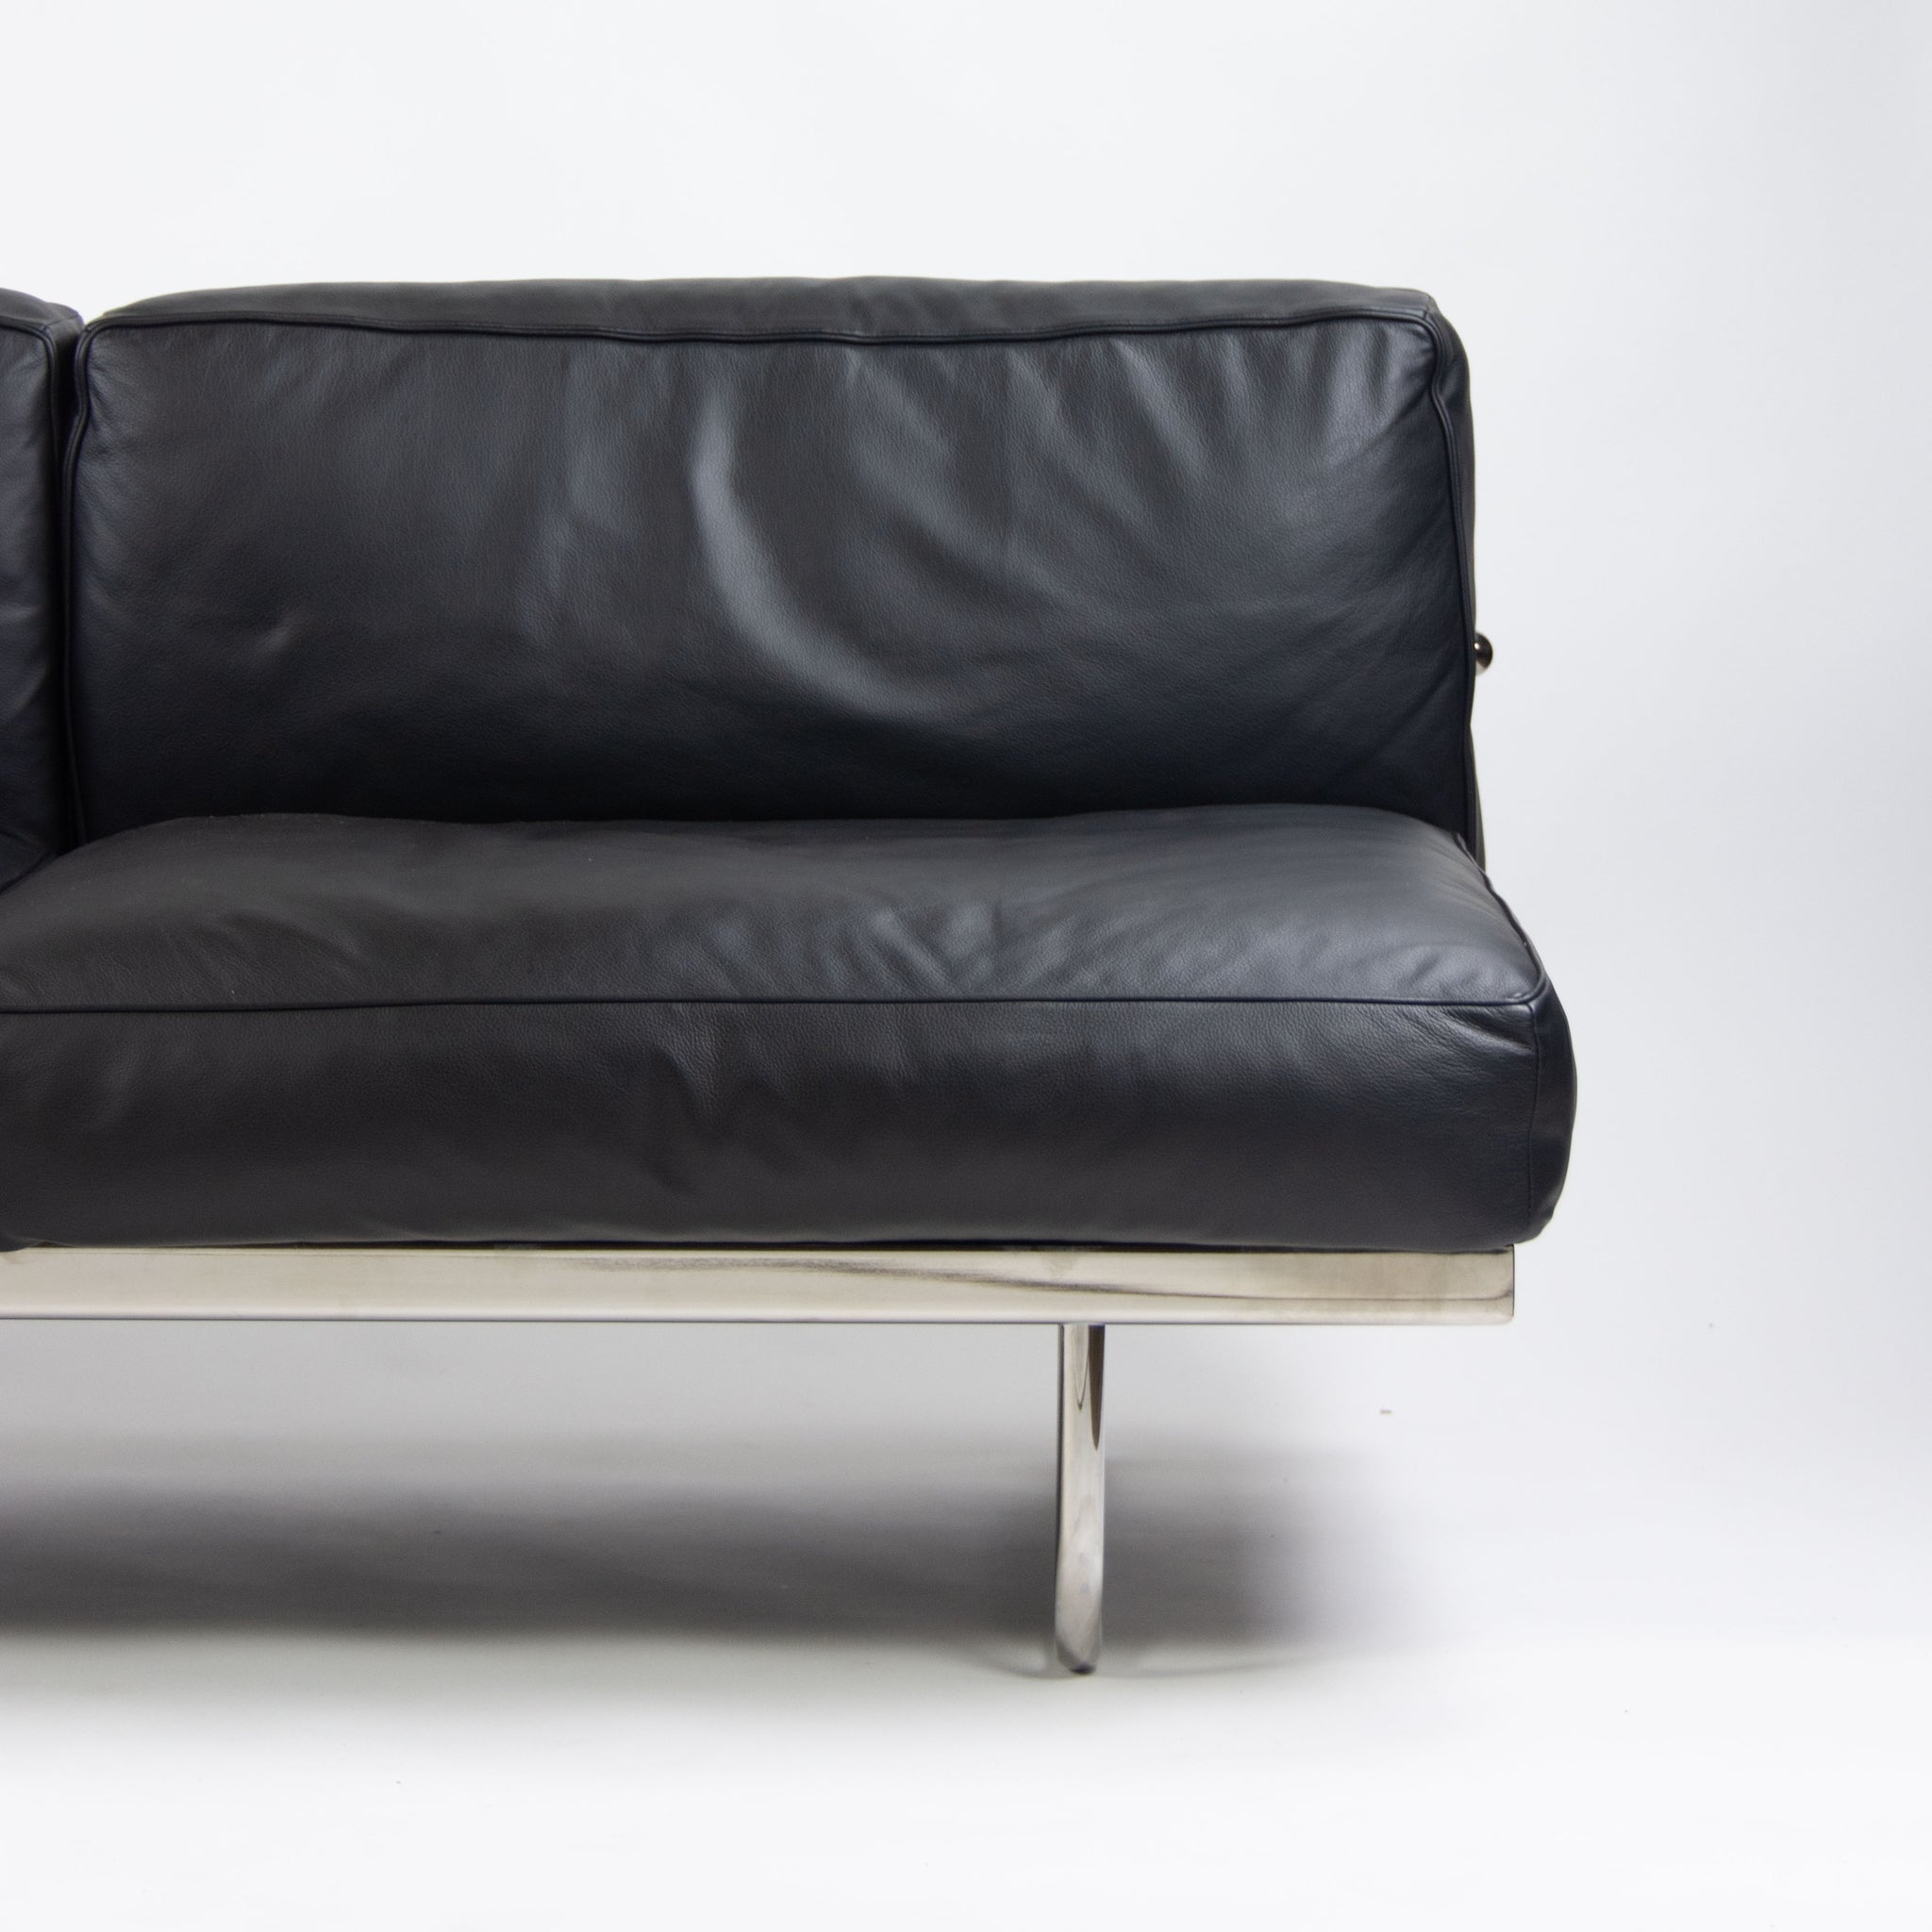 SOLD 2010's Cassina Italy Le Corbusier LC5 Two-Seater Sofa Daybed Black Leather